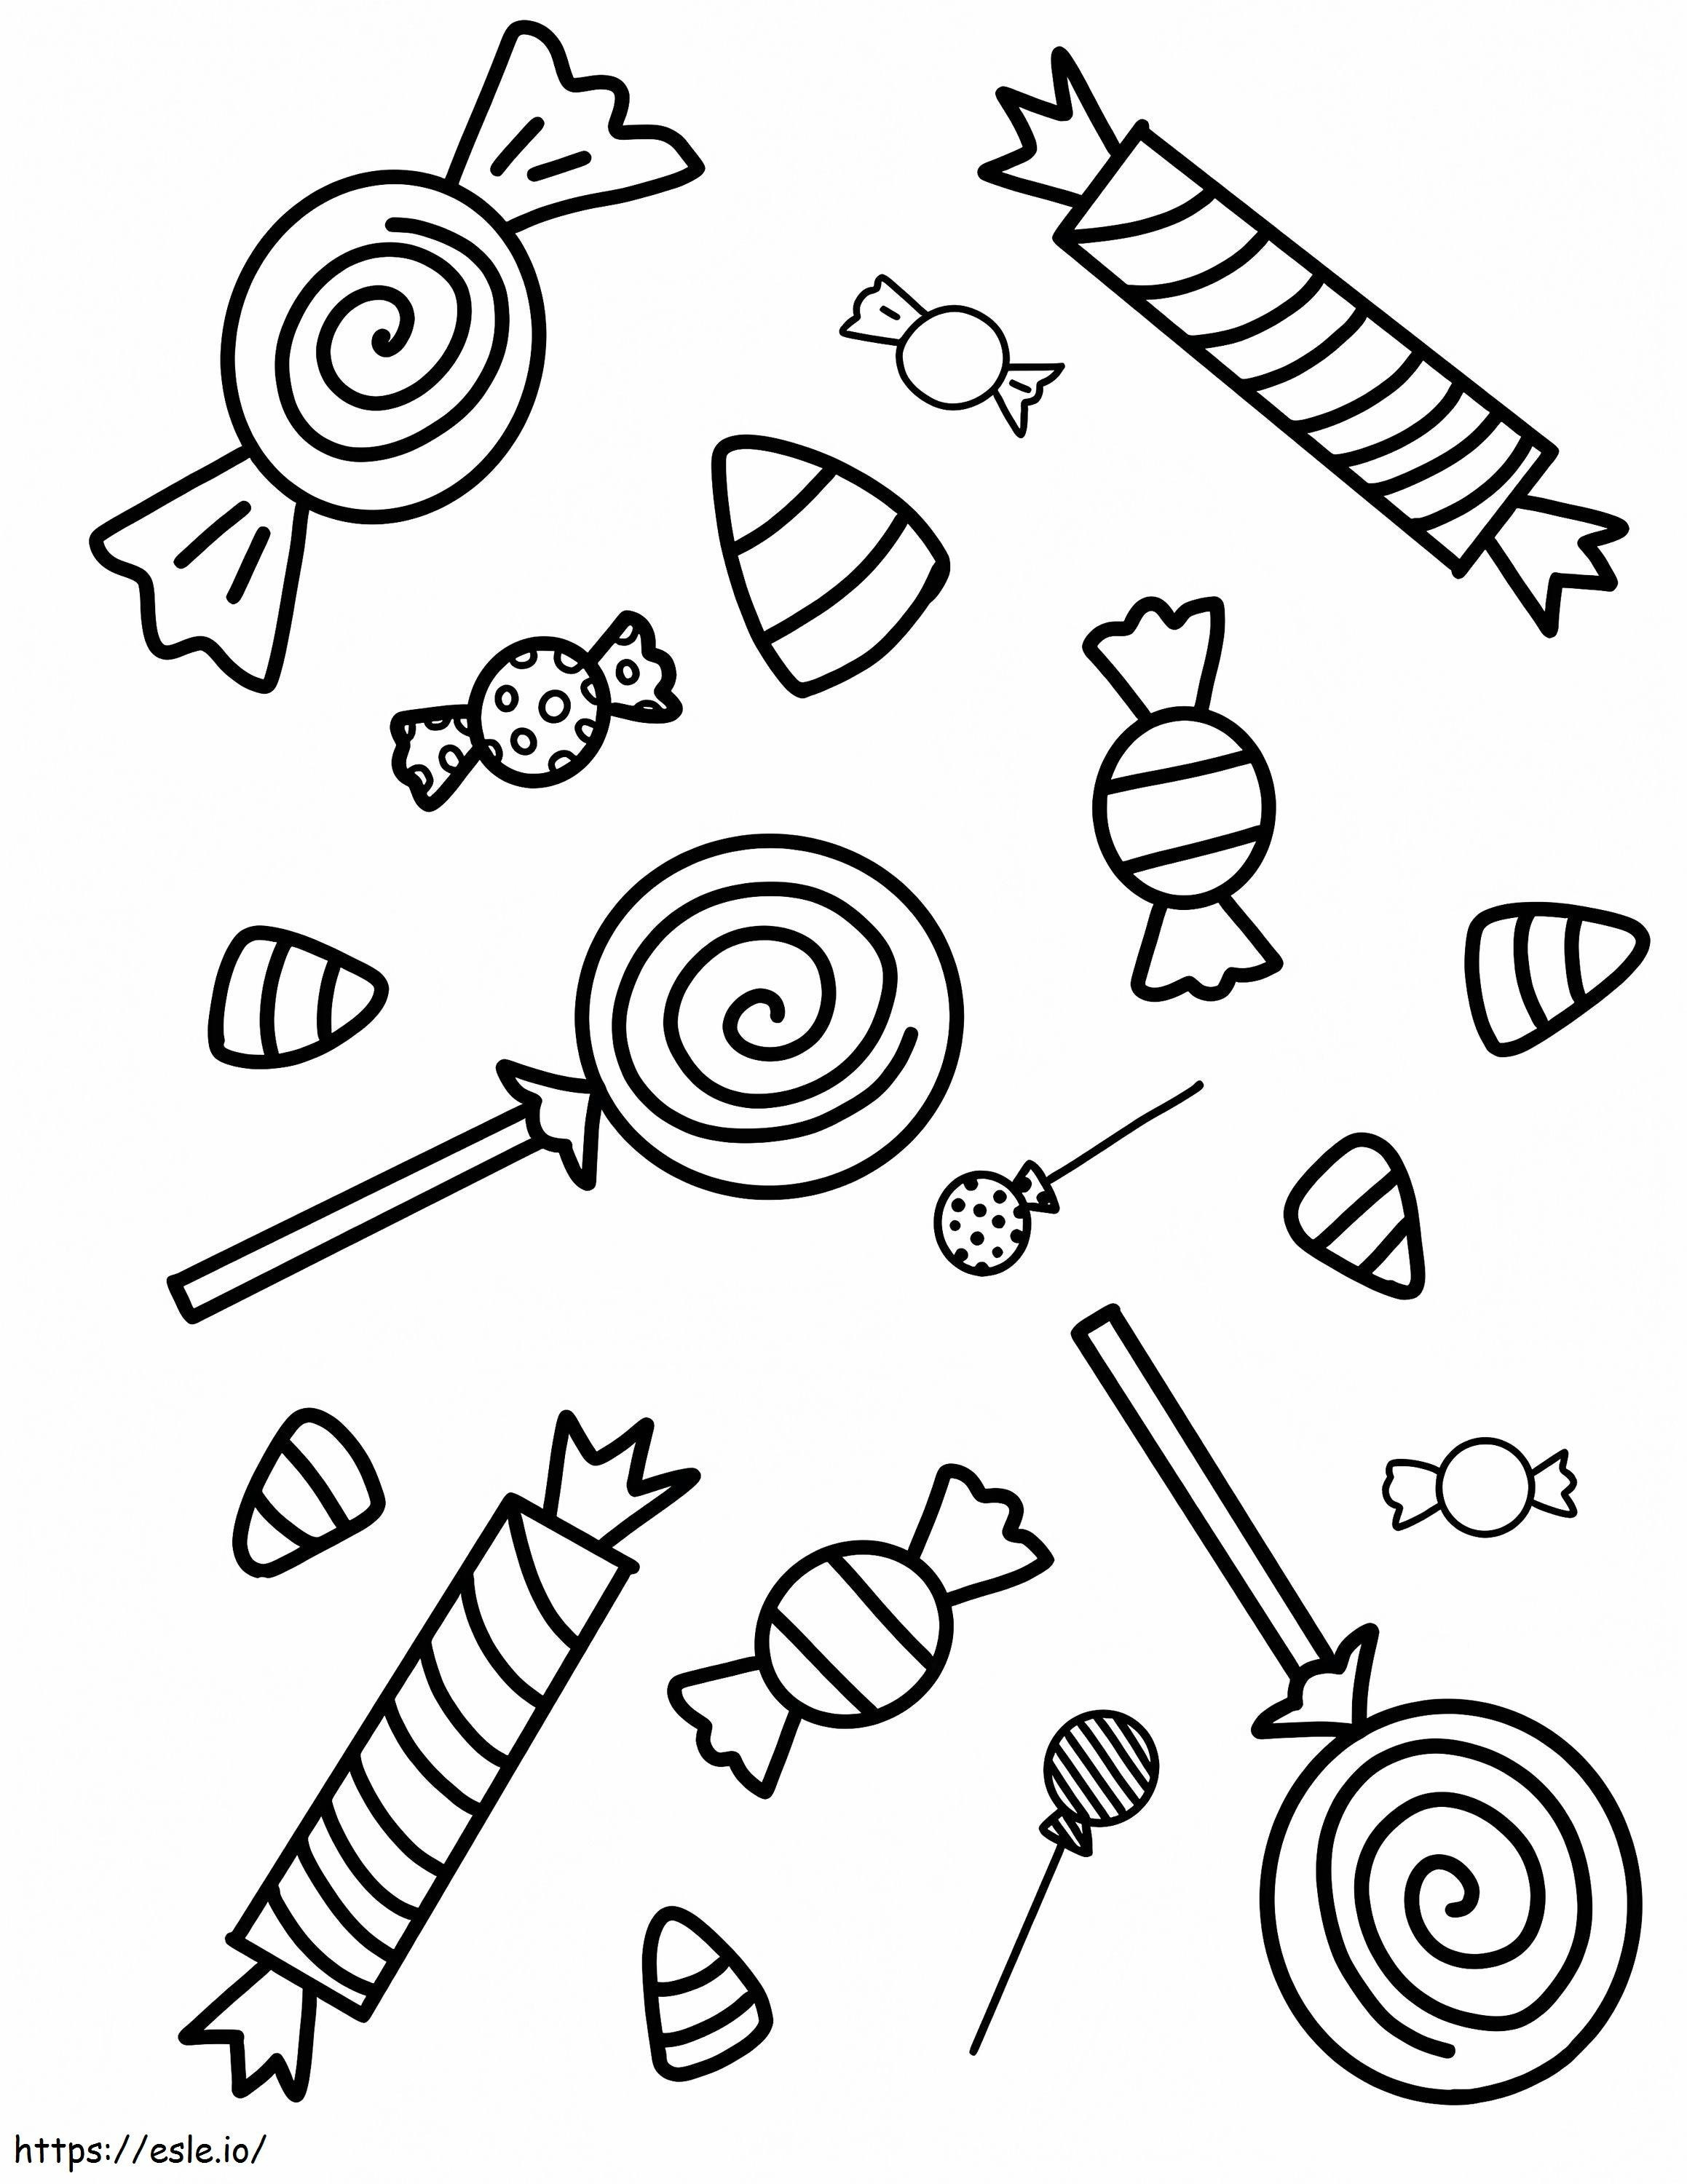 Candies coloring page